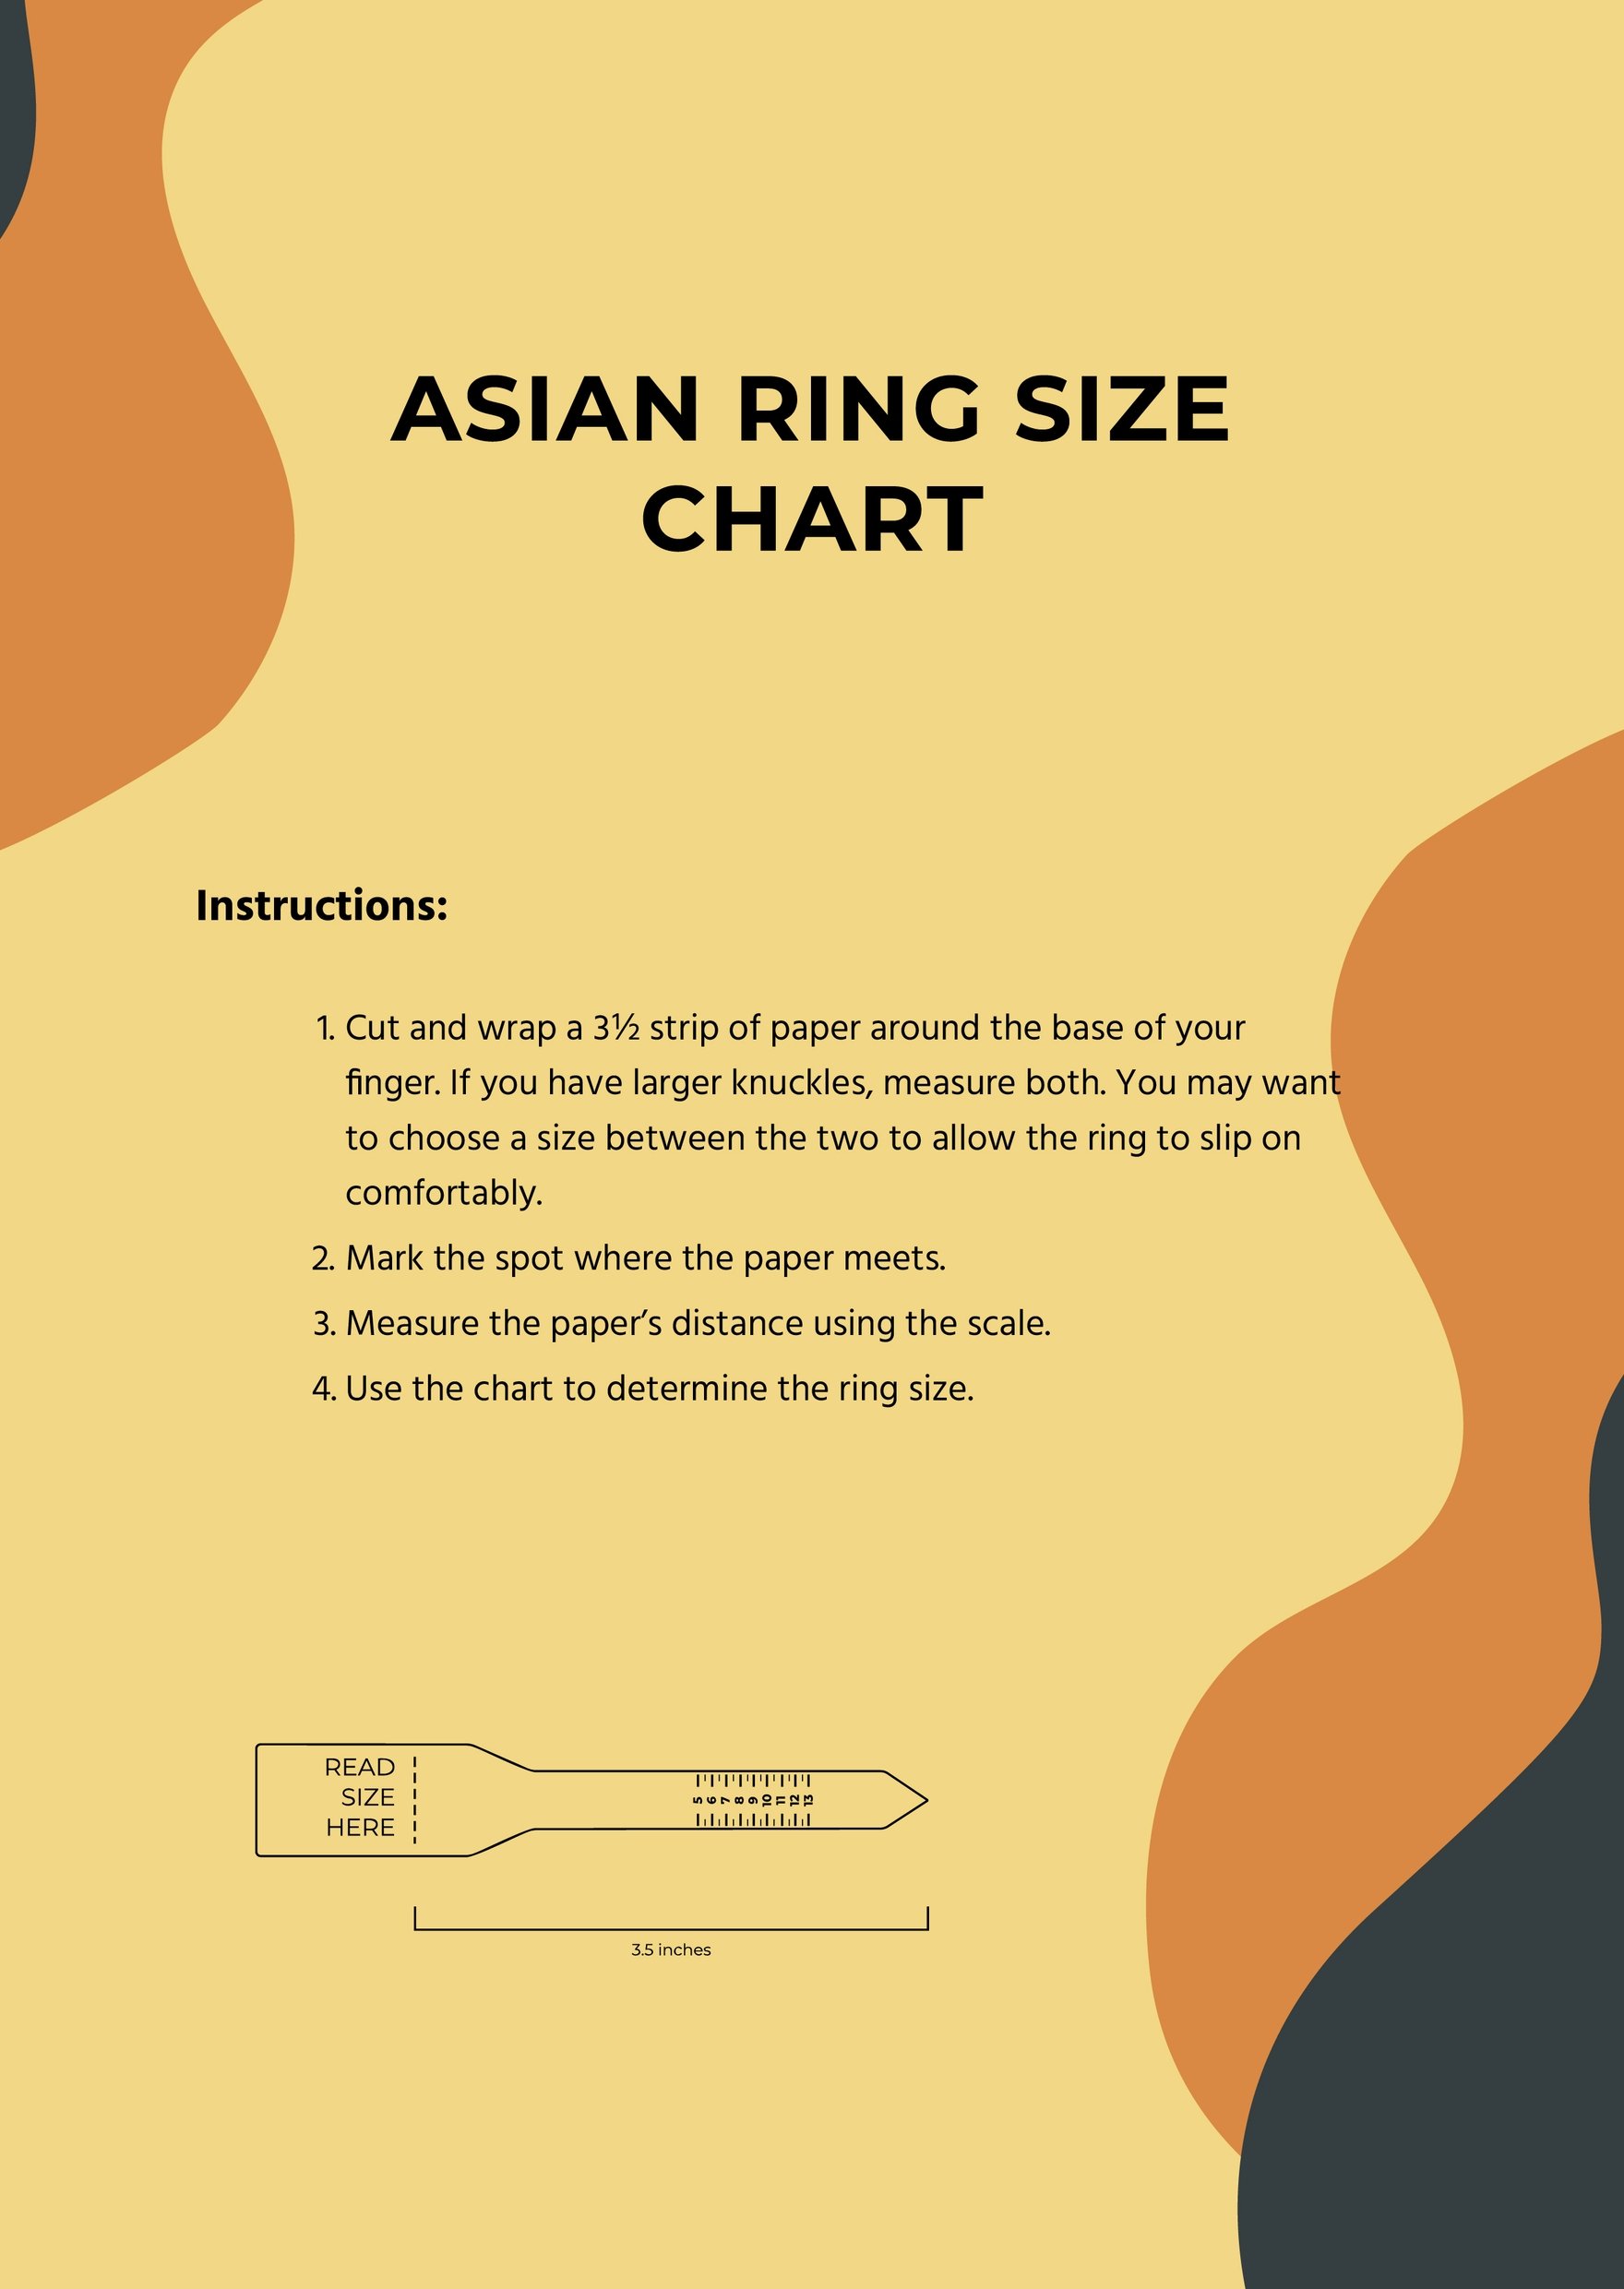 Asian Ring Size Chart Template in PDF, Illustrator